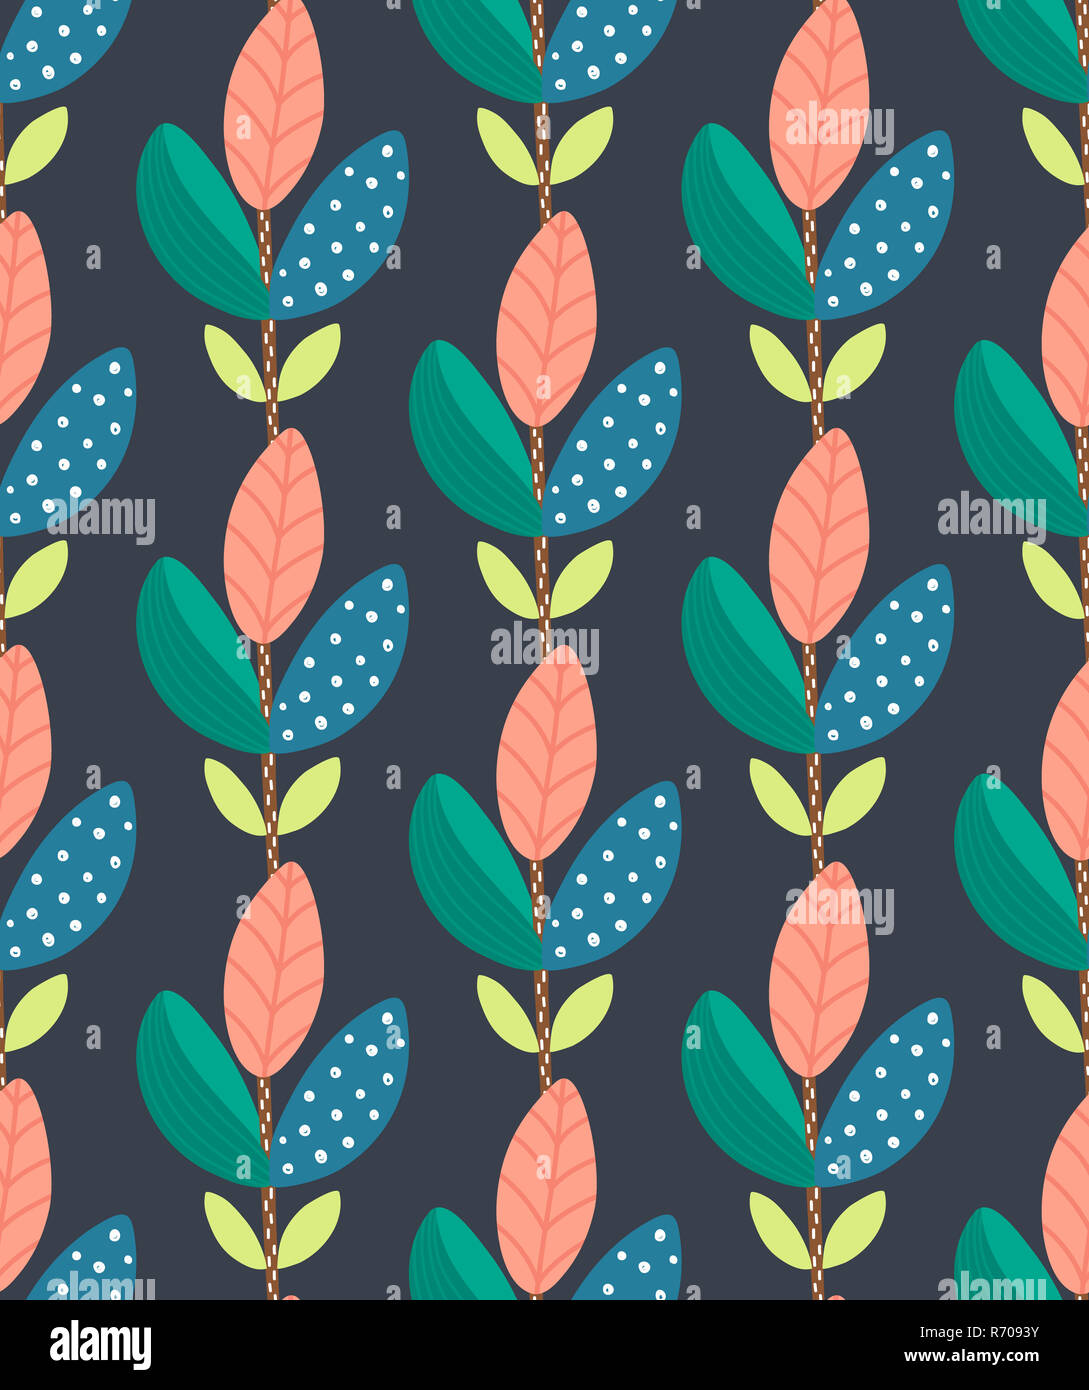 Floral seamless pattern. Hand drawn creative plant. Colorful artistic background. Abstract herb. It can be used for cover, card, fabric, wrapping, wallpaper, other interior decor Stock Photo